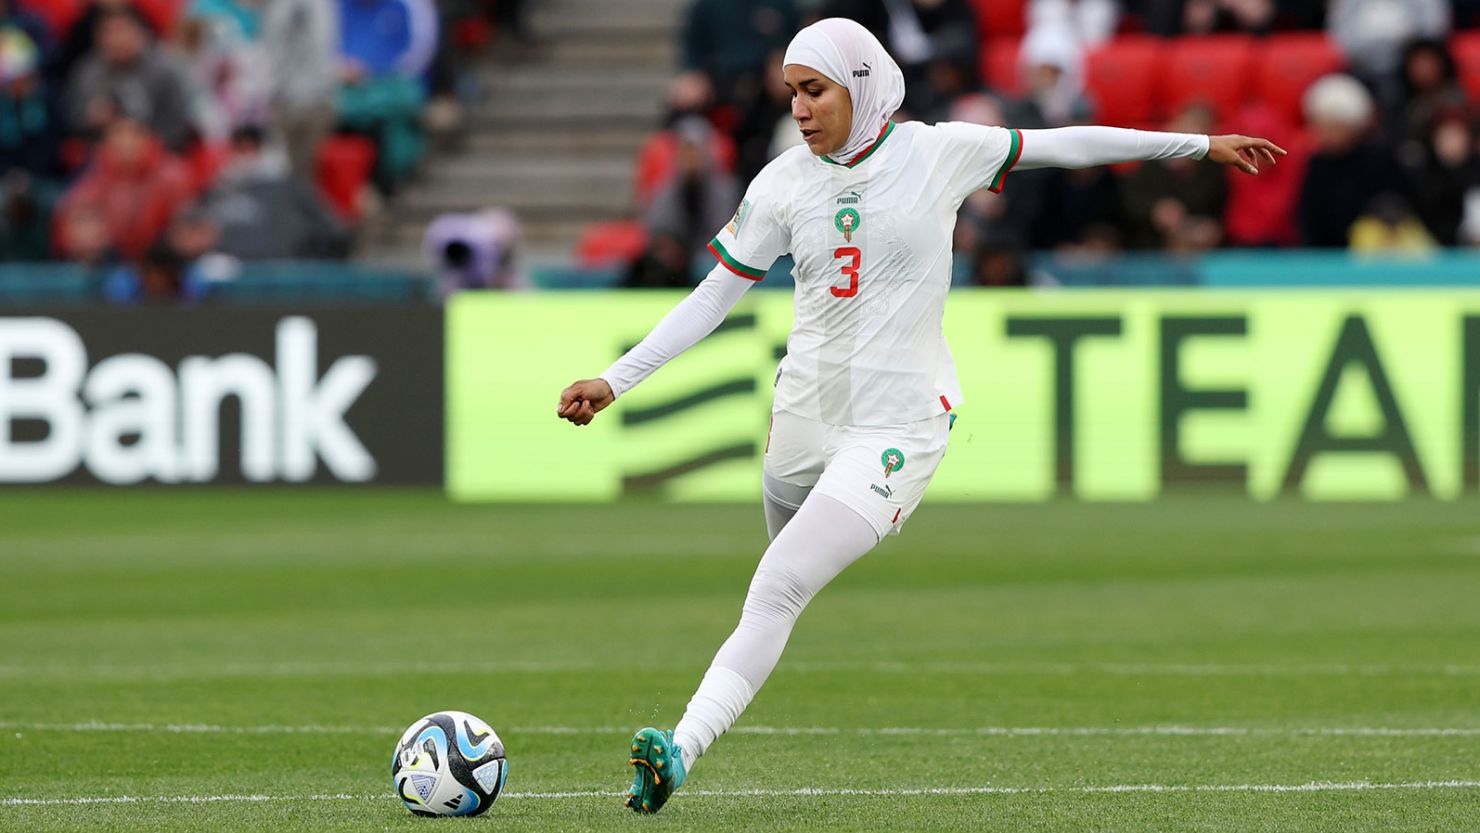 Nouhaila Benzina made her first start at the World Cup. 